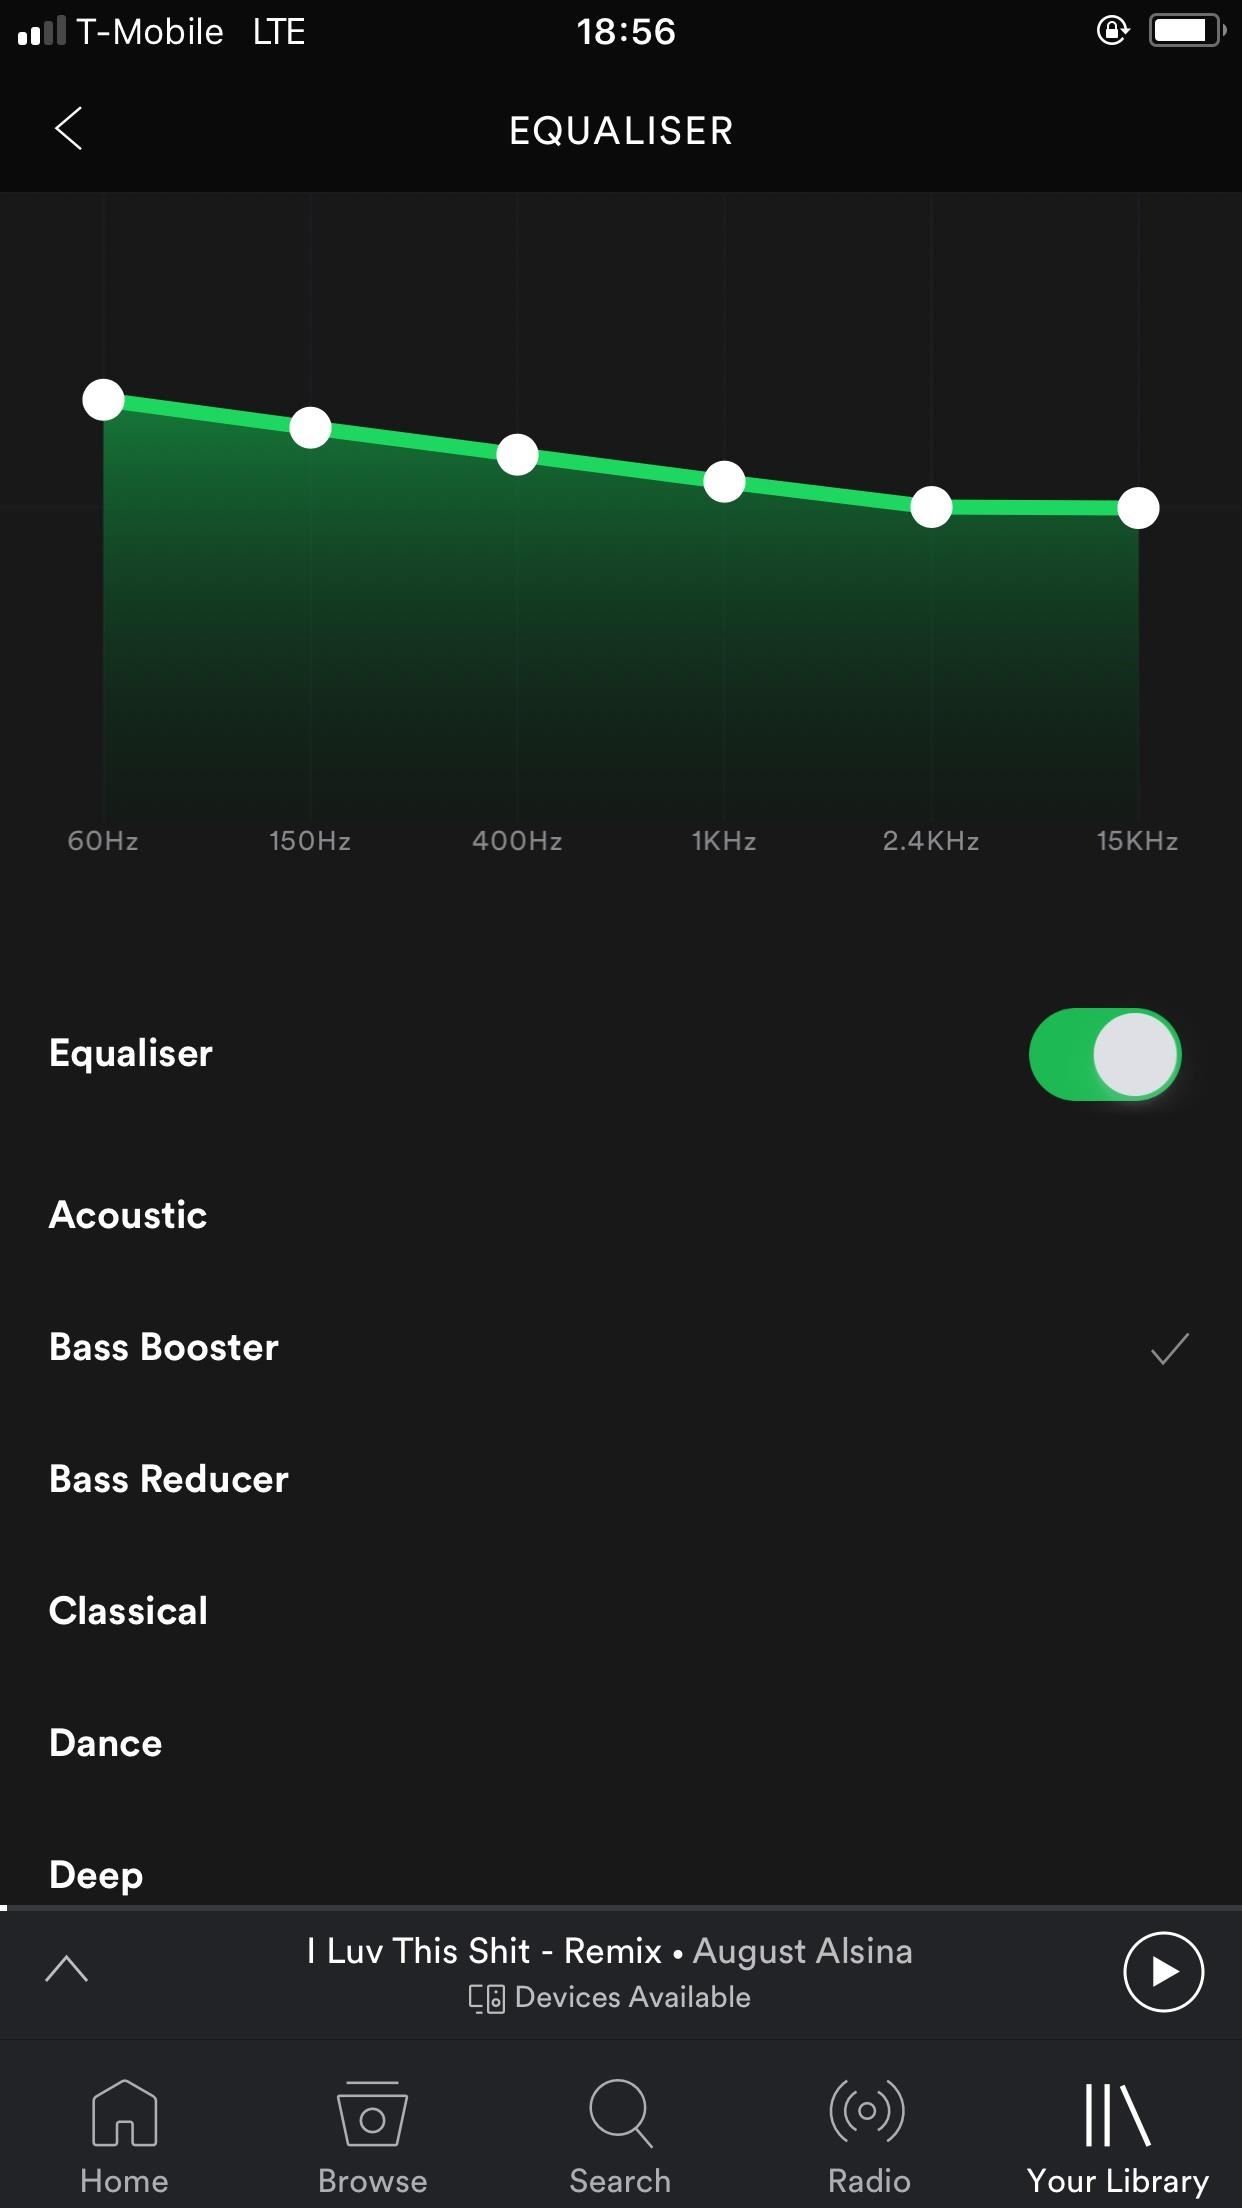 Spotify 101: How to Make Your Music Sound Better by Using an Equalizer